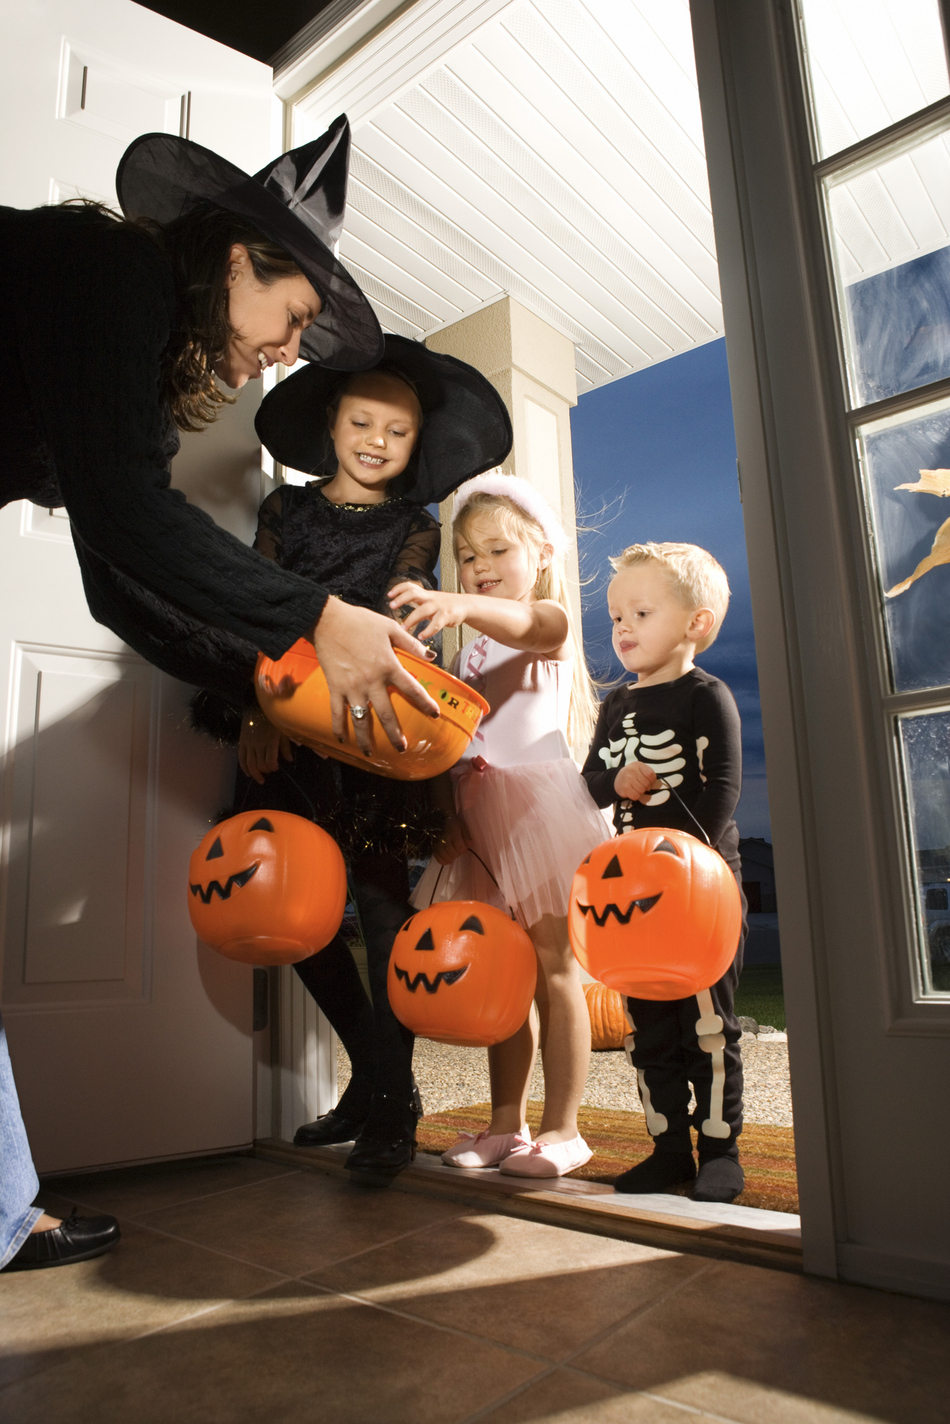 Three Healthier Alternatives to Handing Out Halloween Candy